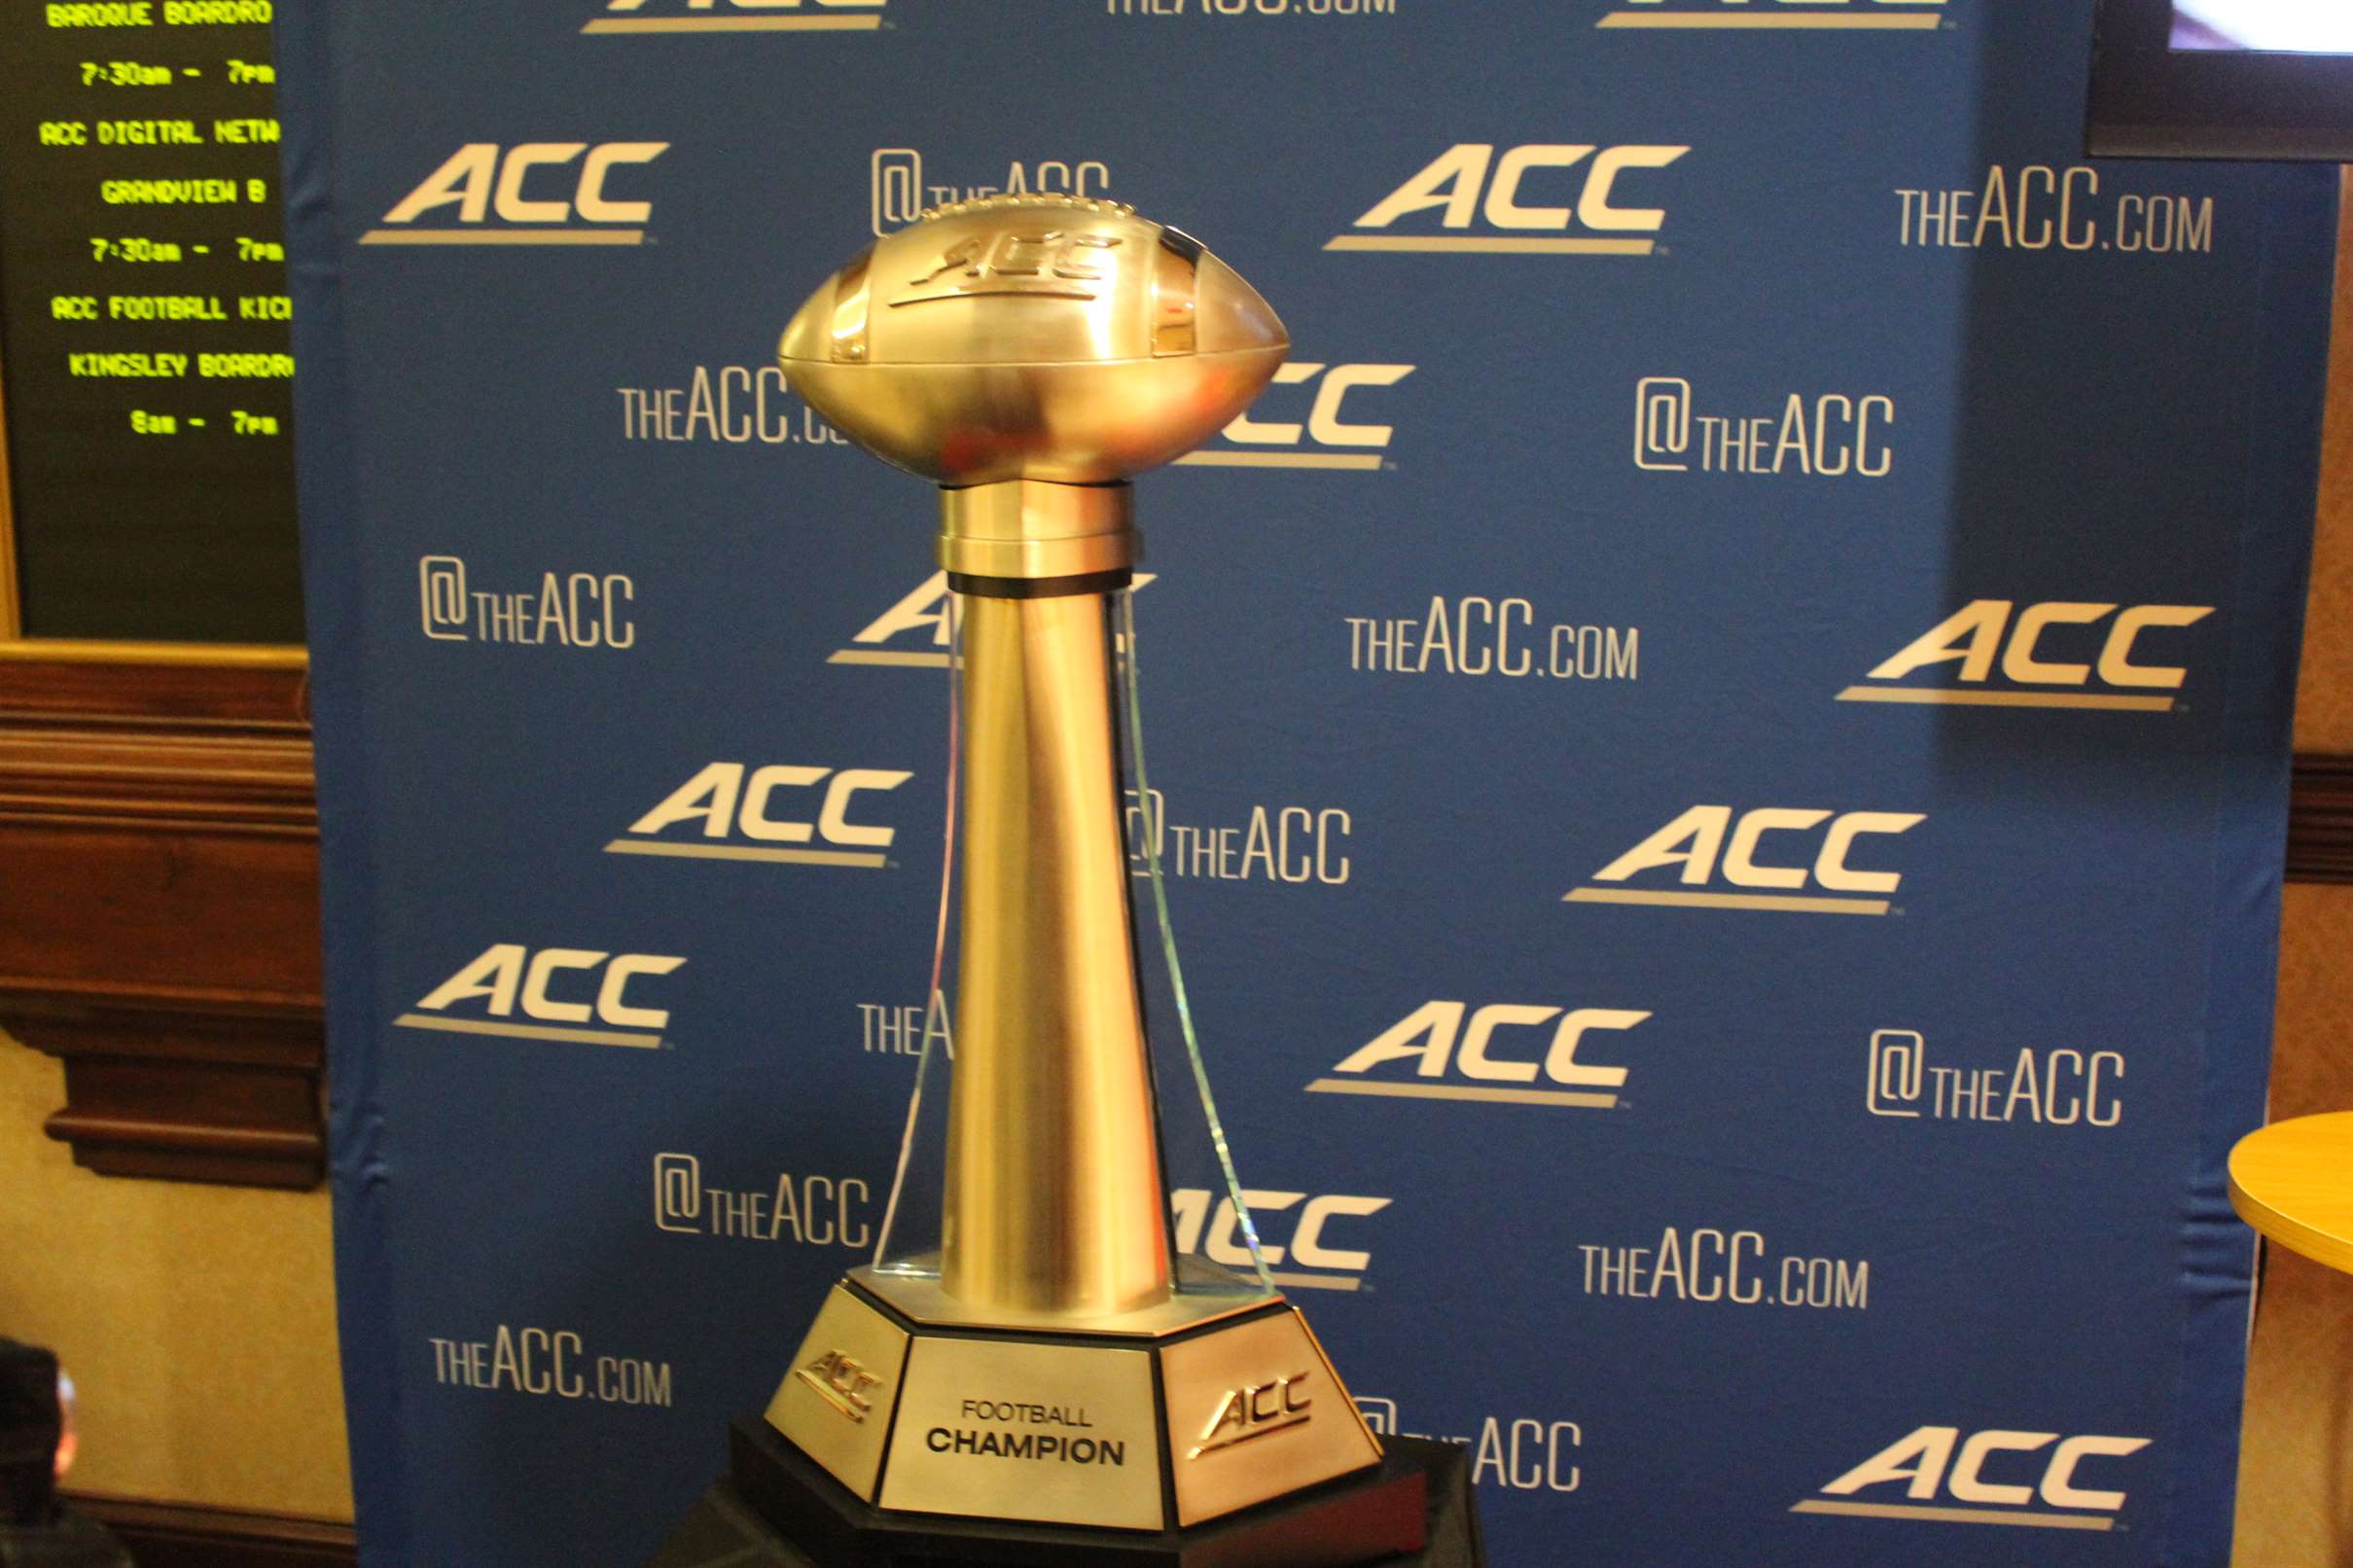 ACC Extends Charlotte (Of Course) As Football Championship Host Site